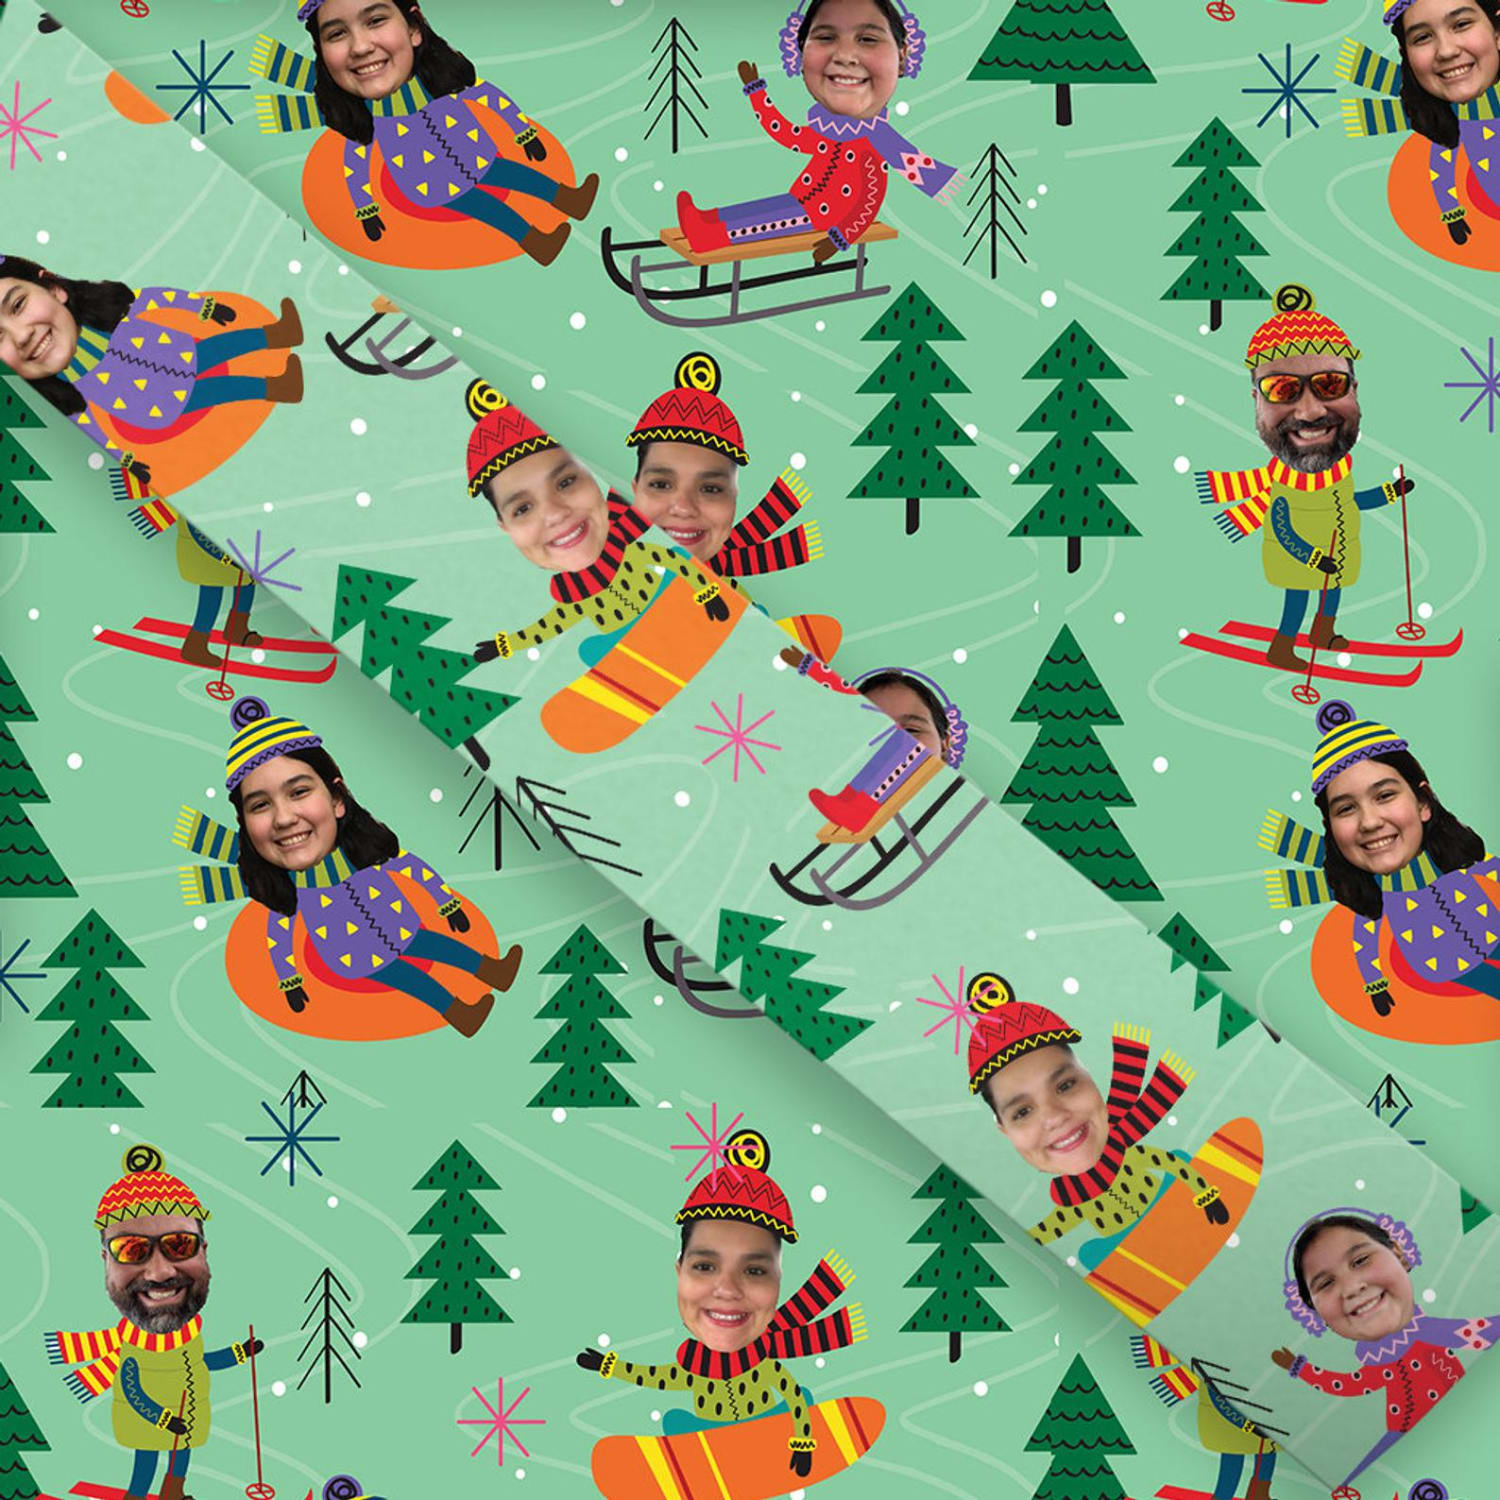  Customized Face Gift Wrapping Paper, Merry Christmas